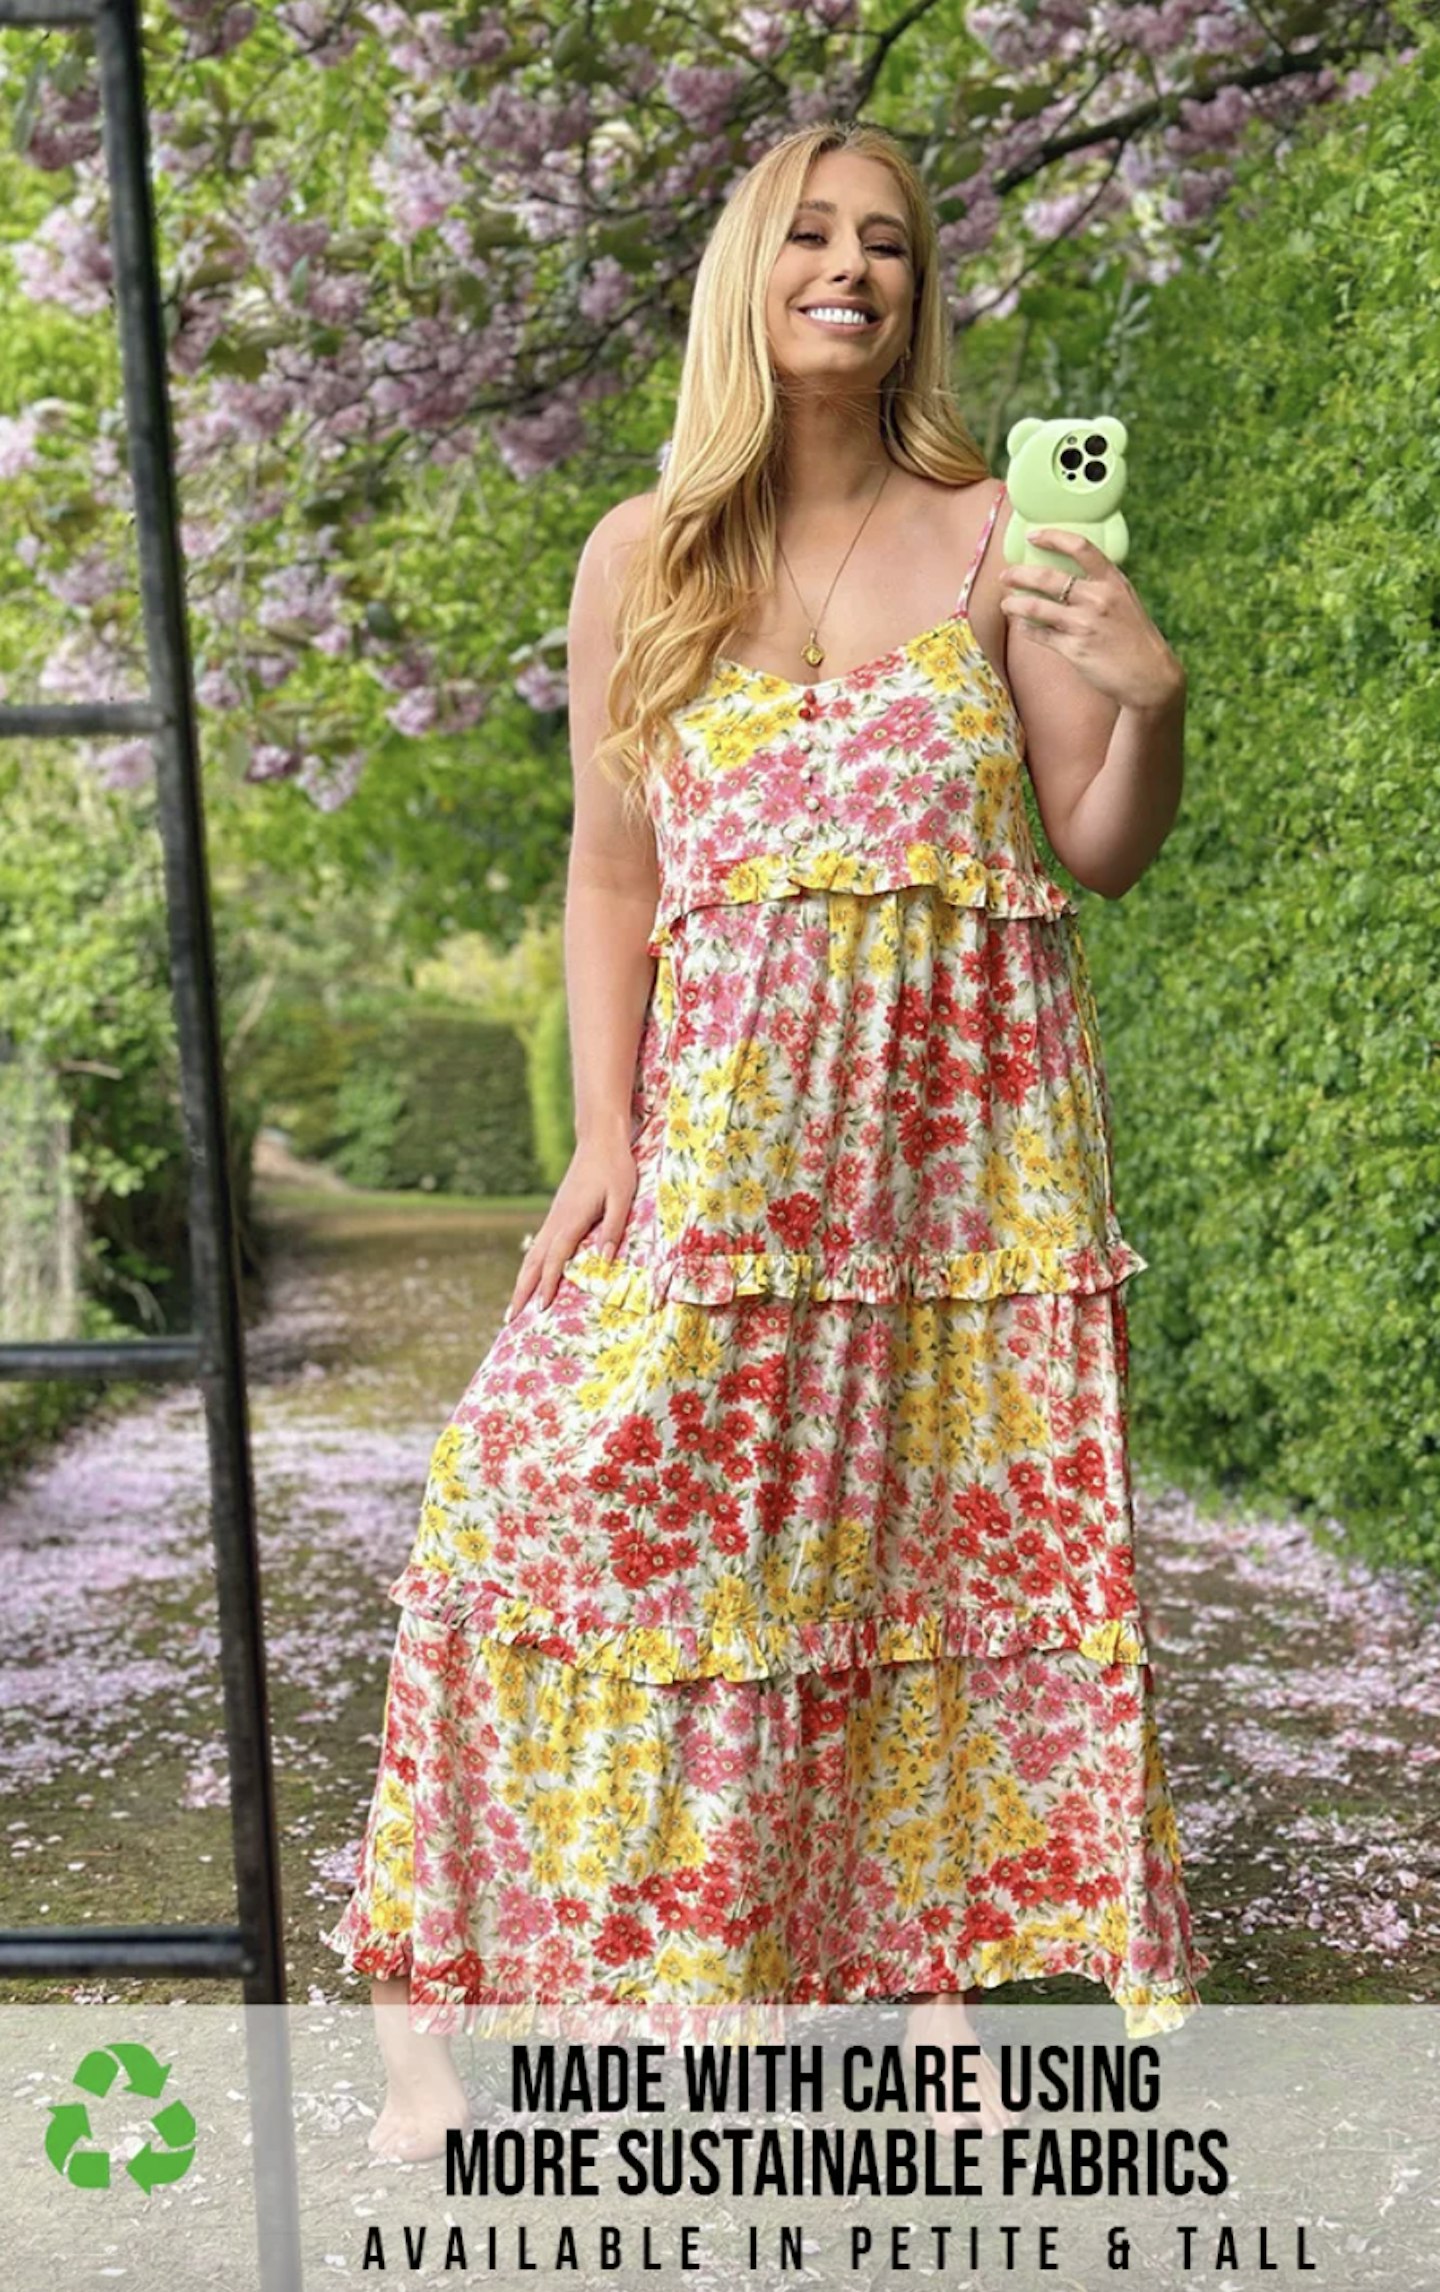 InTheStyle Stacey Solomon Sustainable Yellow Floral Frill Midaxi Dress